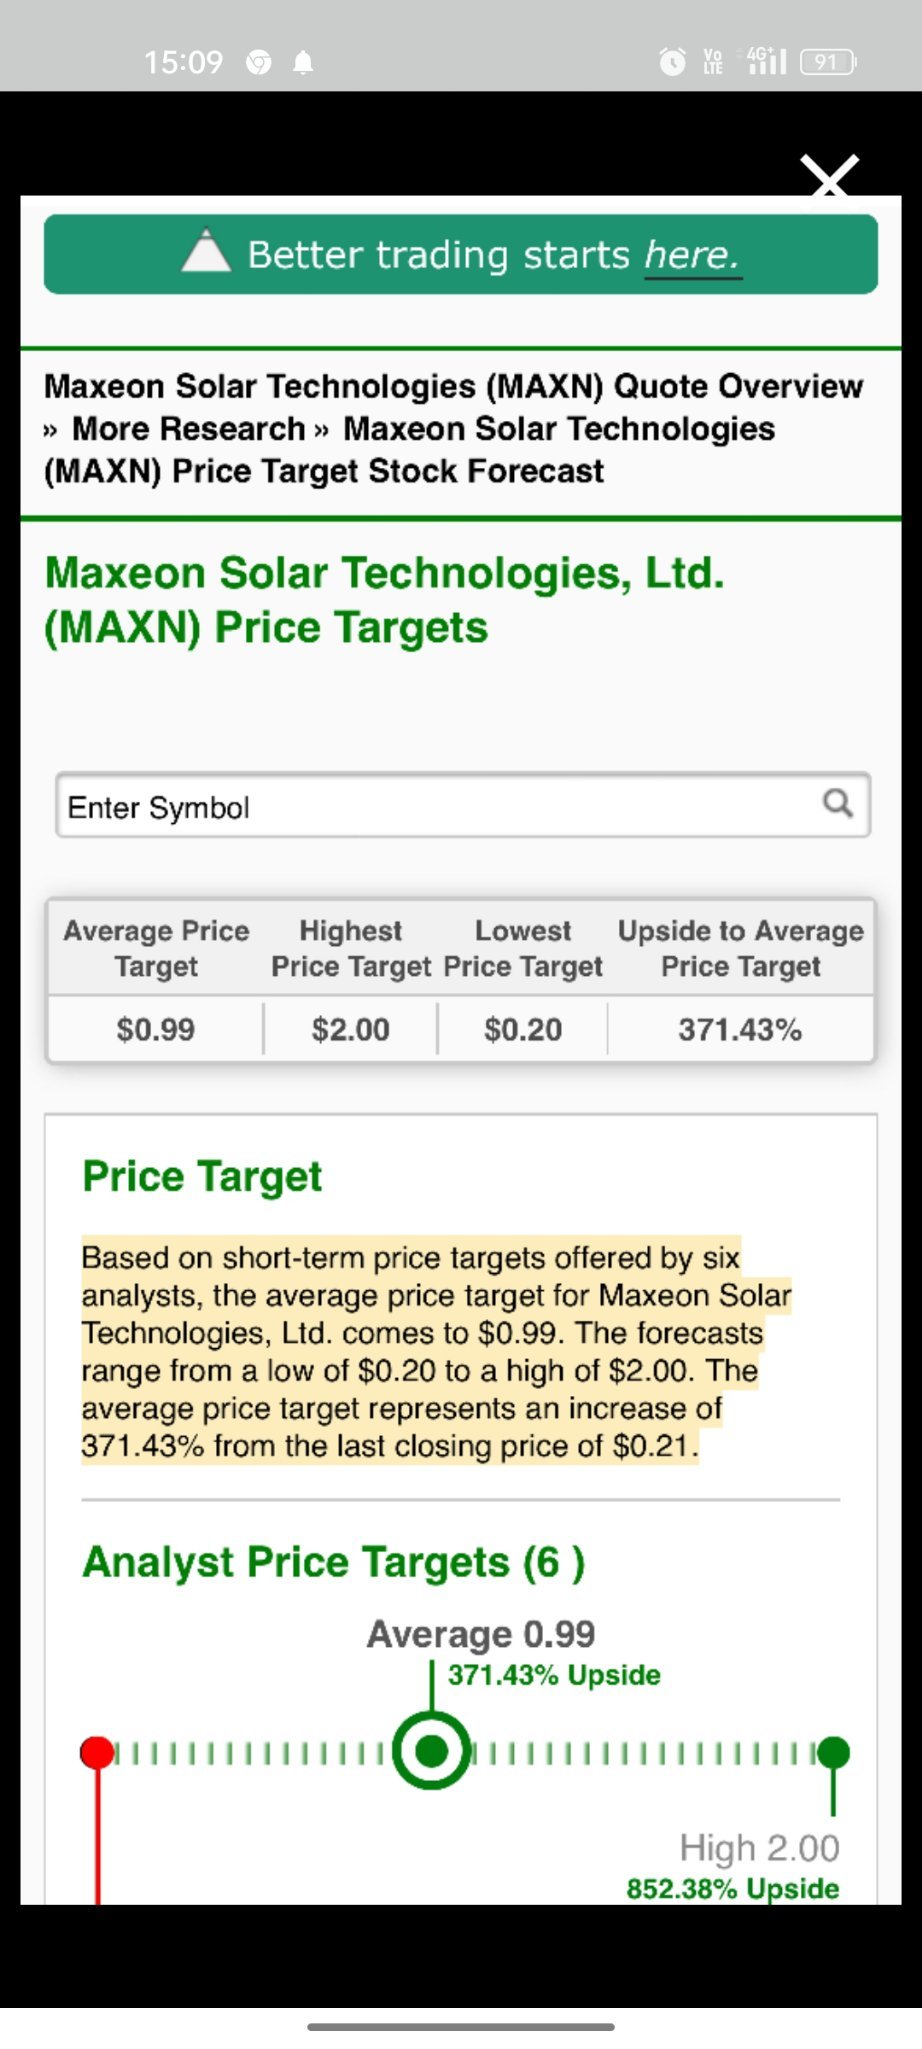 $Maxeon Solar Technologies (MAXN.US)$ so far the lowest price target is somehow accurate [Emm][Emm][Emm] now I want to the avg price target achieve not asking m...